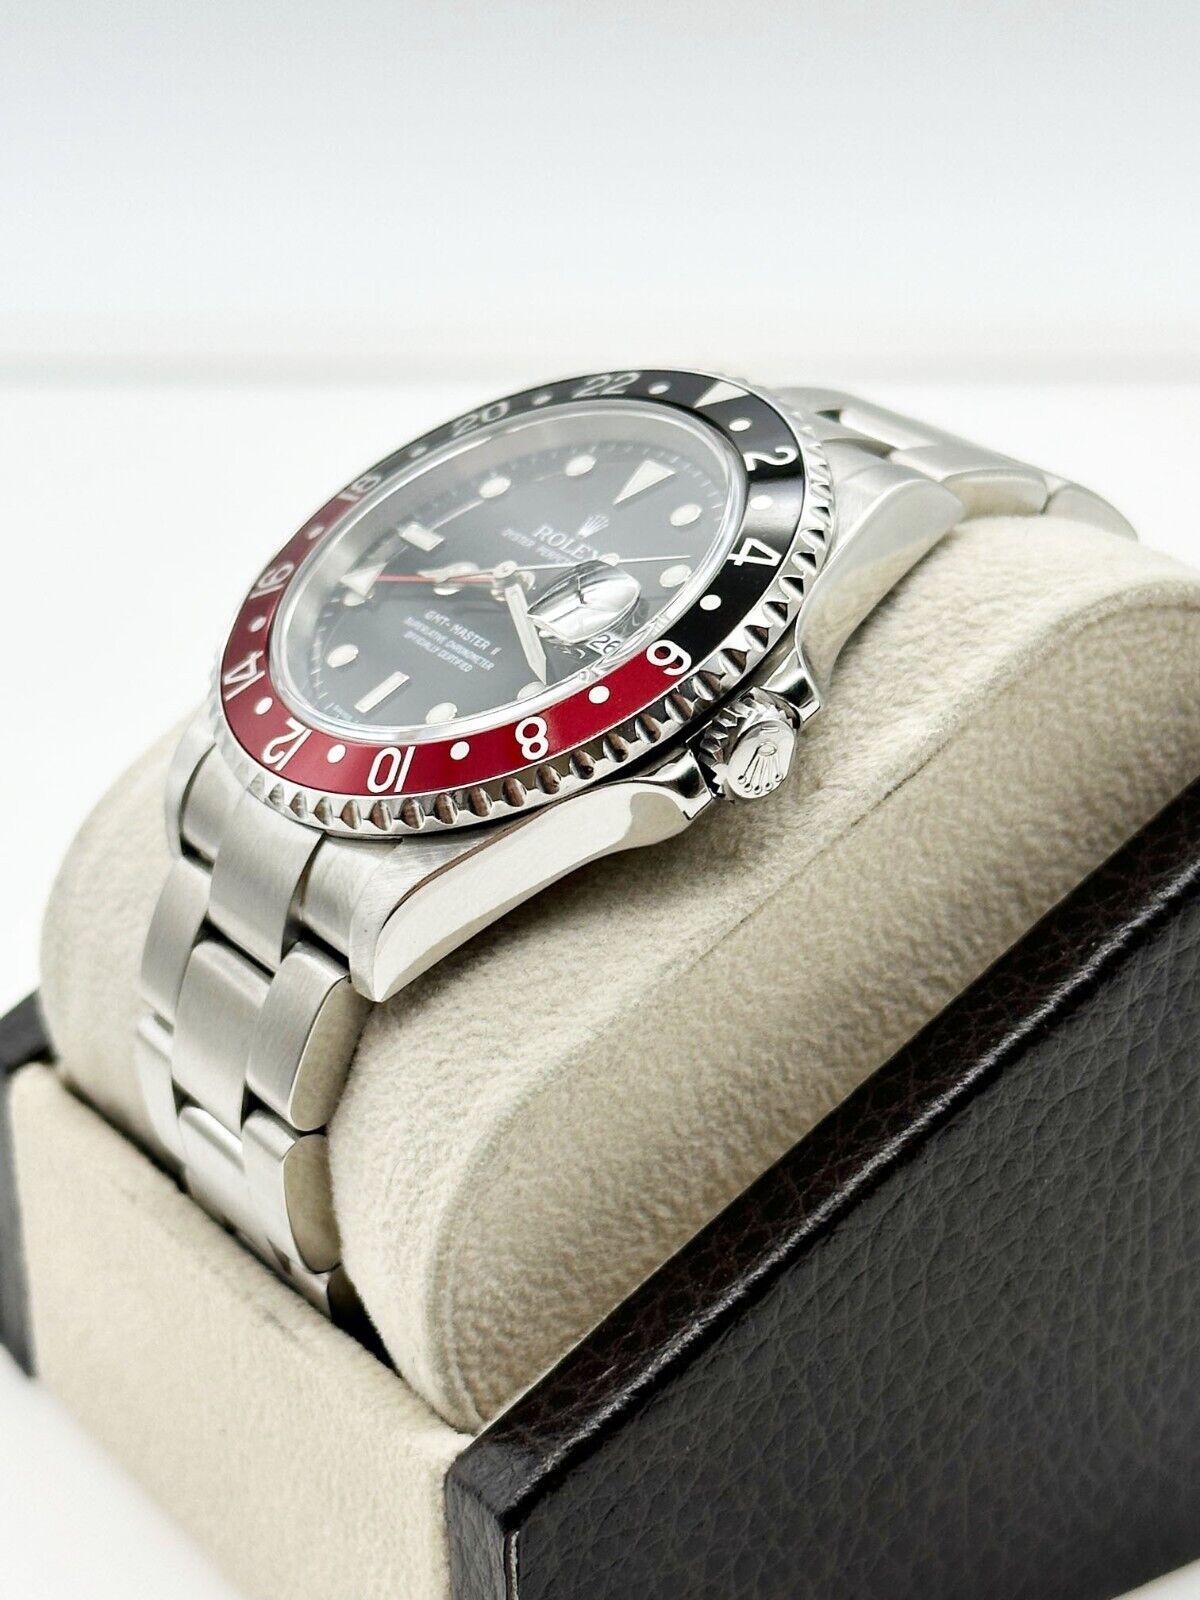 Rolex 16710 GMT Master II Coke Red and Black Stainless Steel 1